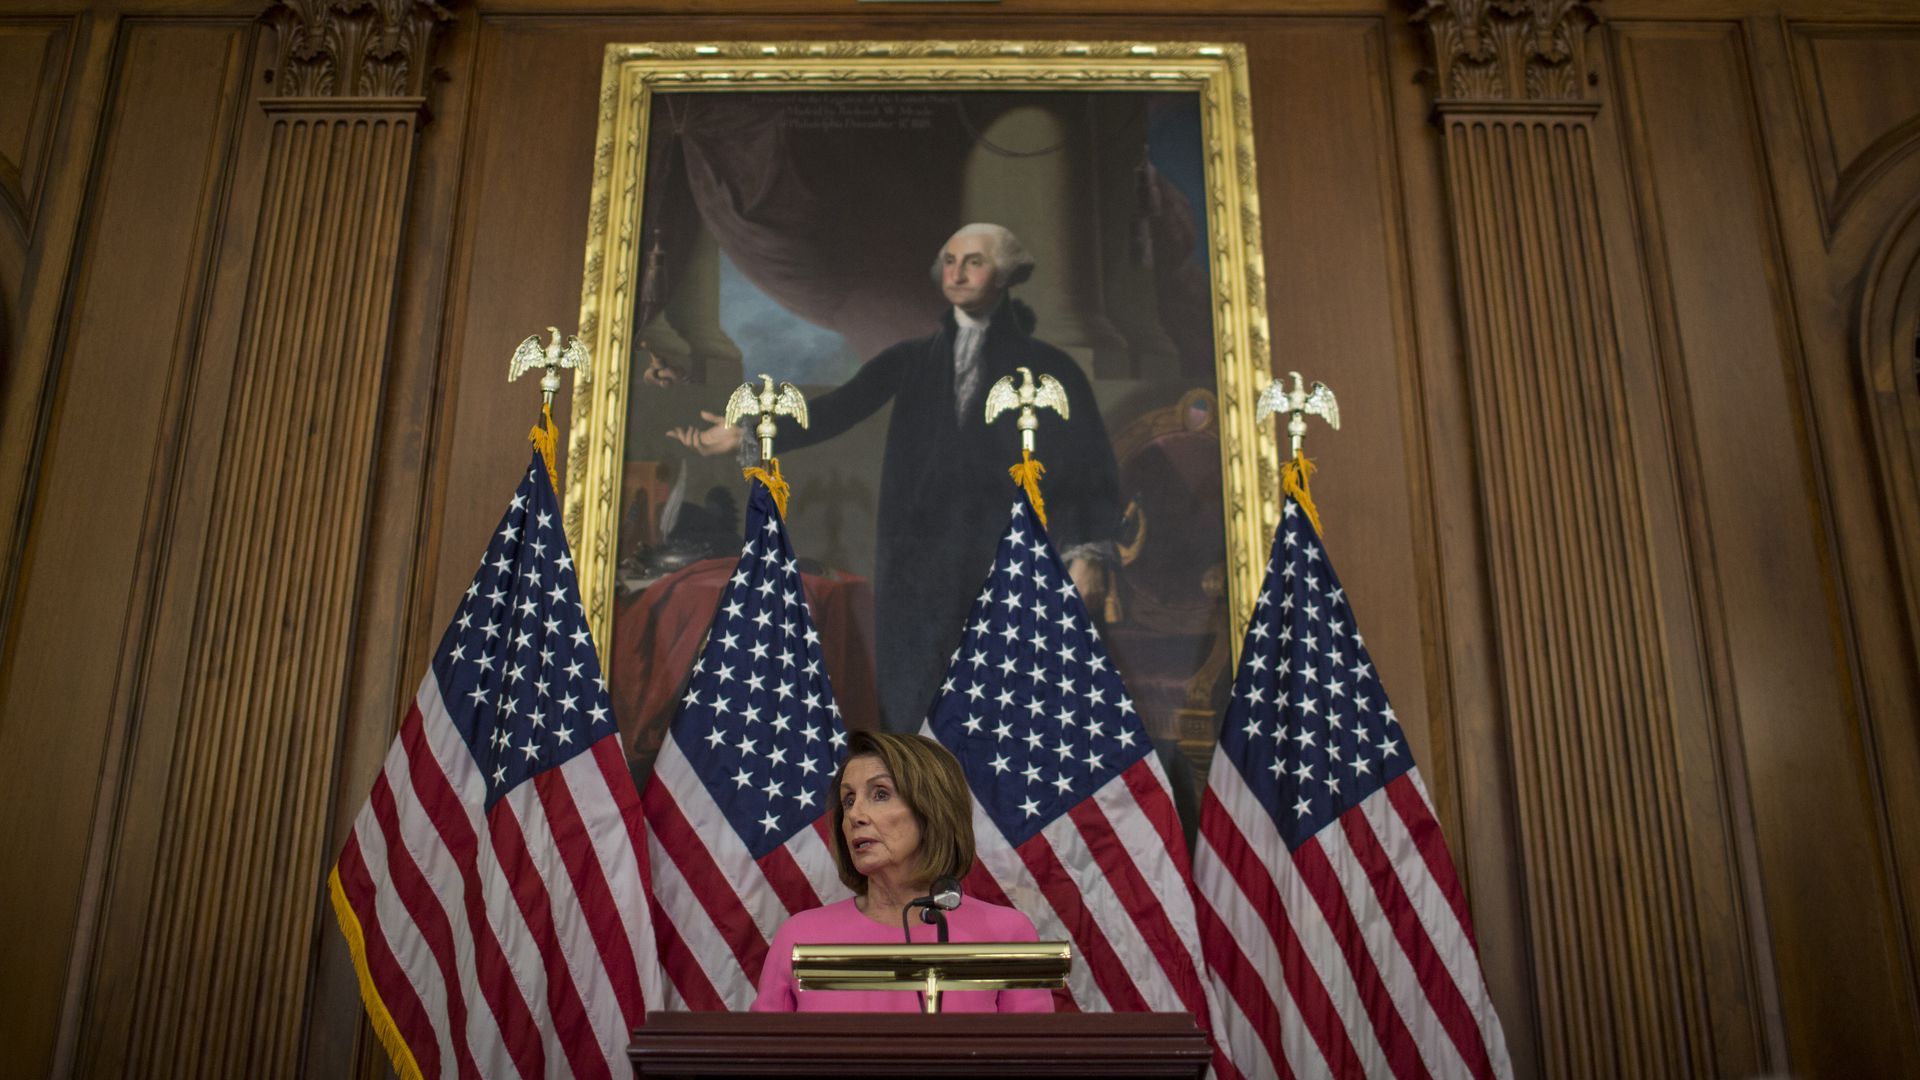 Nancy Pelosi speaks from a podium in front of American flags and a painting of George Washington